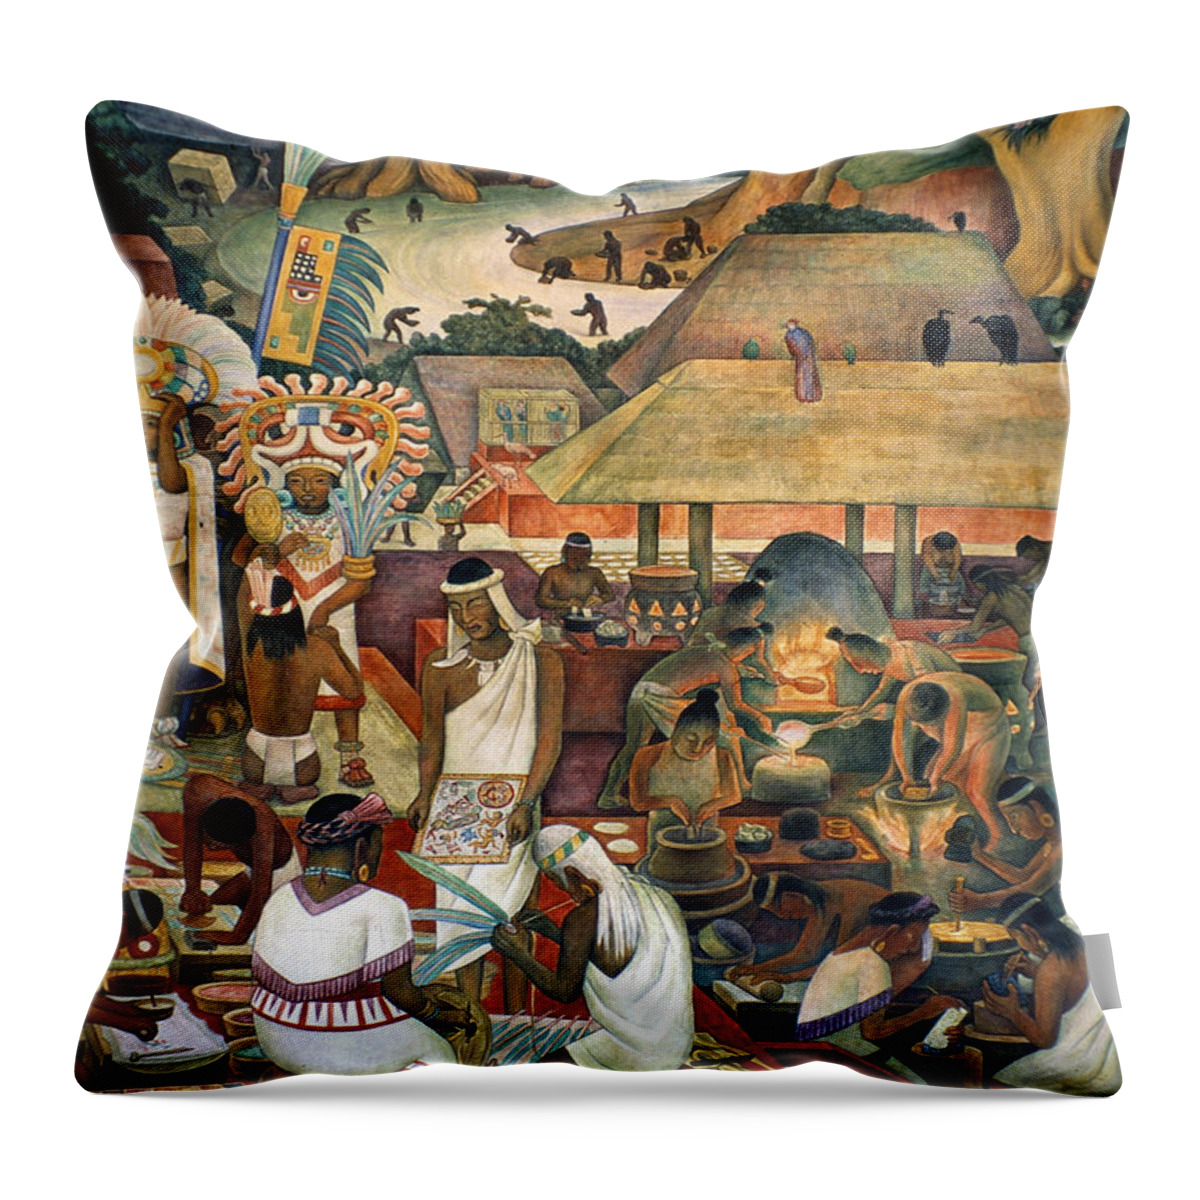 1925 Throw Pillow featuring the painting Rivera Pre-columbian Life by Granger